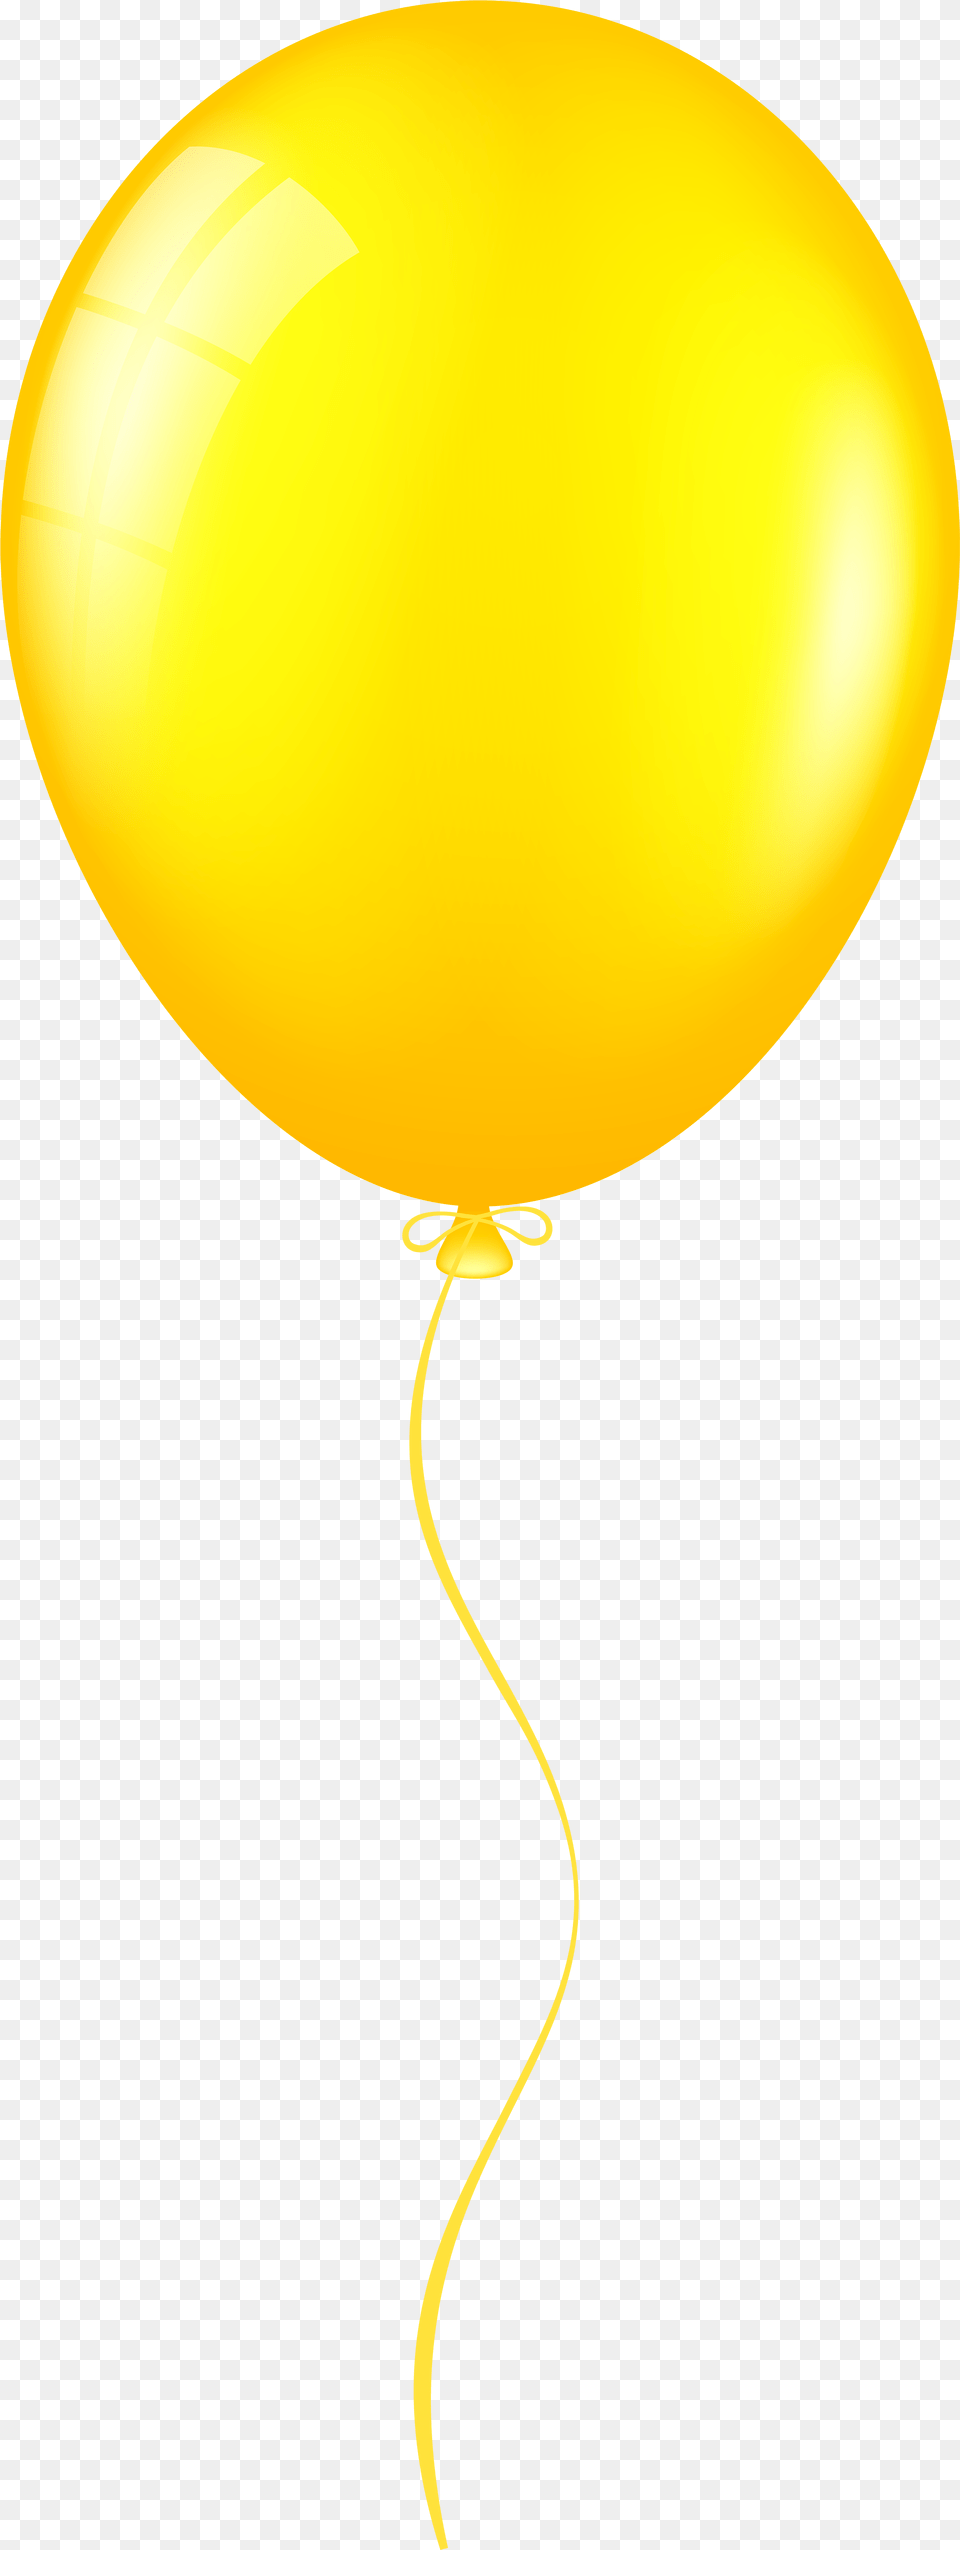 Library Of Black And Orange Balloons Picture Free Birthday Balloon Png